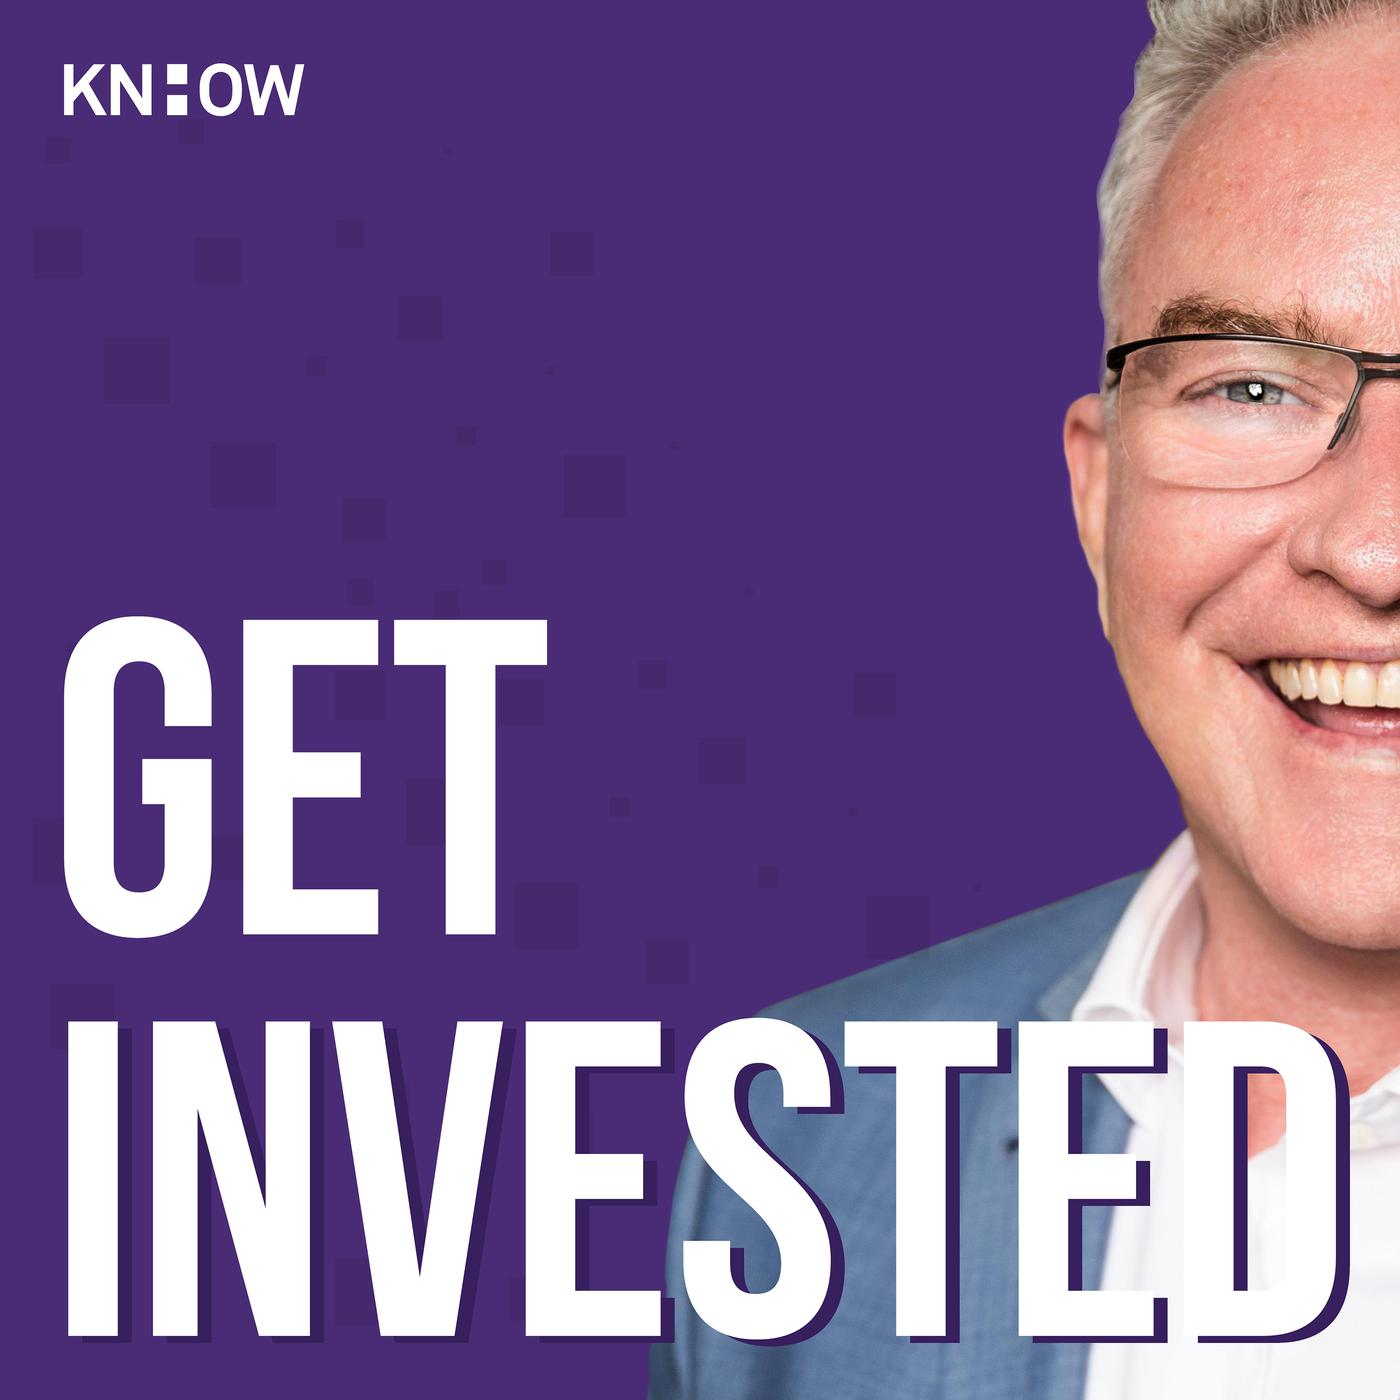 Get Invested: Part 1 - Lawrie Moore on investing in trust